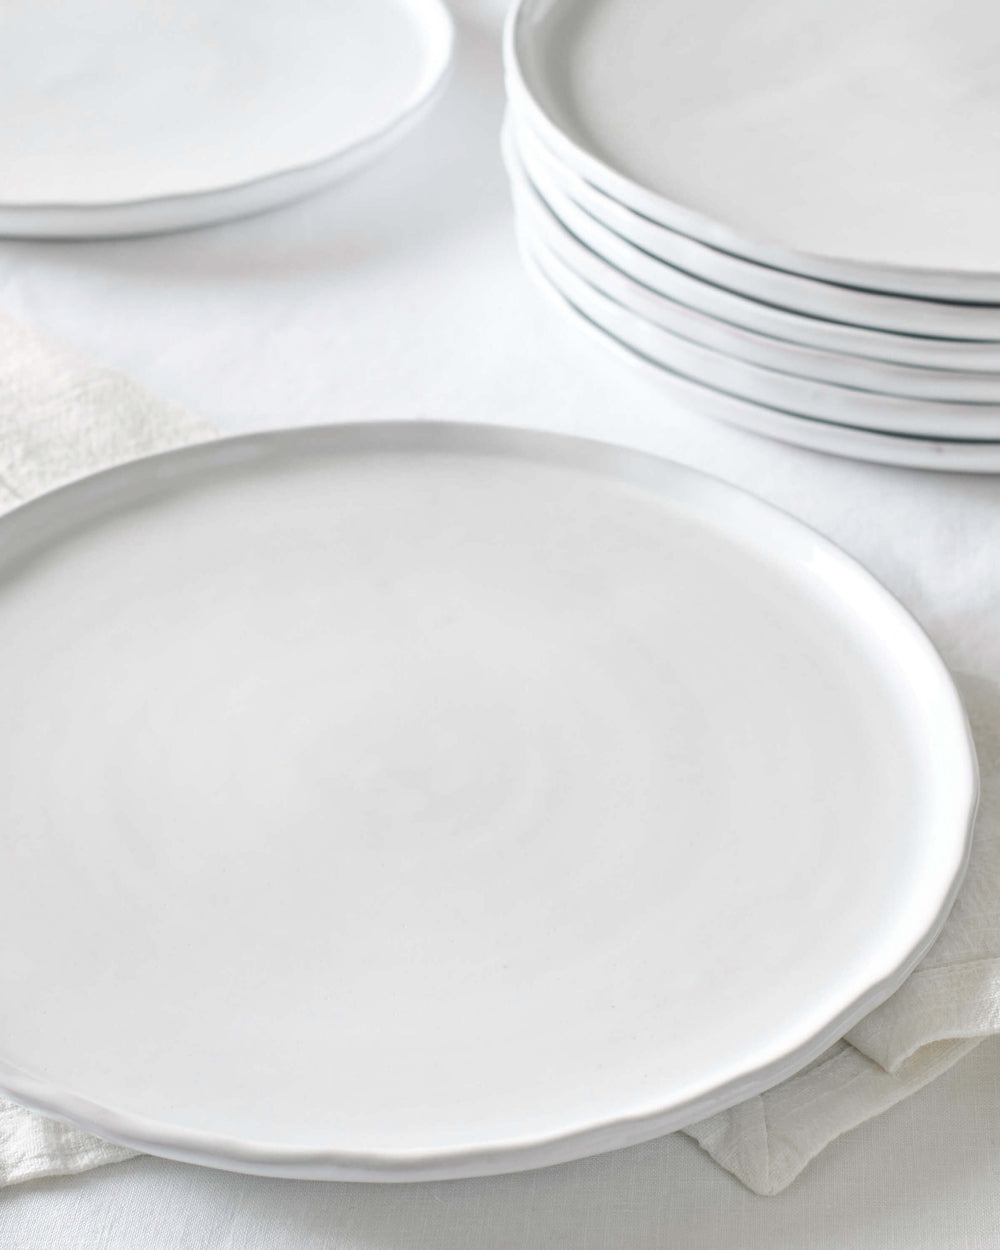 Khira ceramic dinner plates stacked against white background. Made by artisans in Morocco.